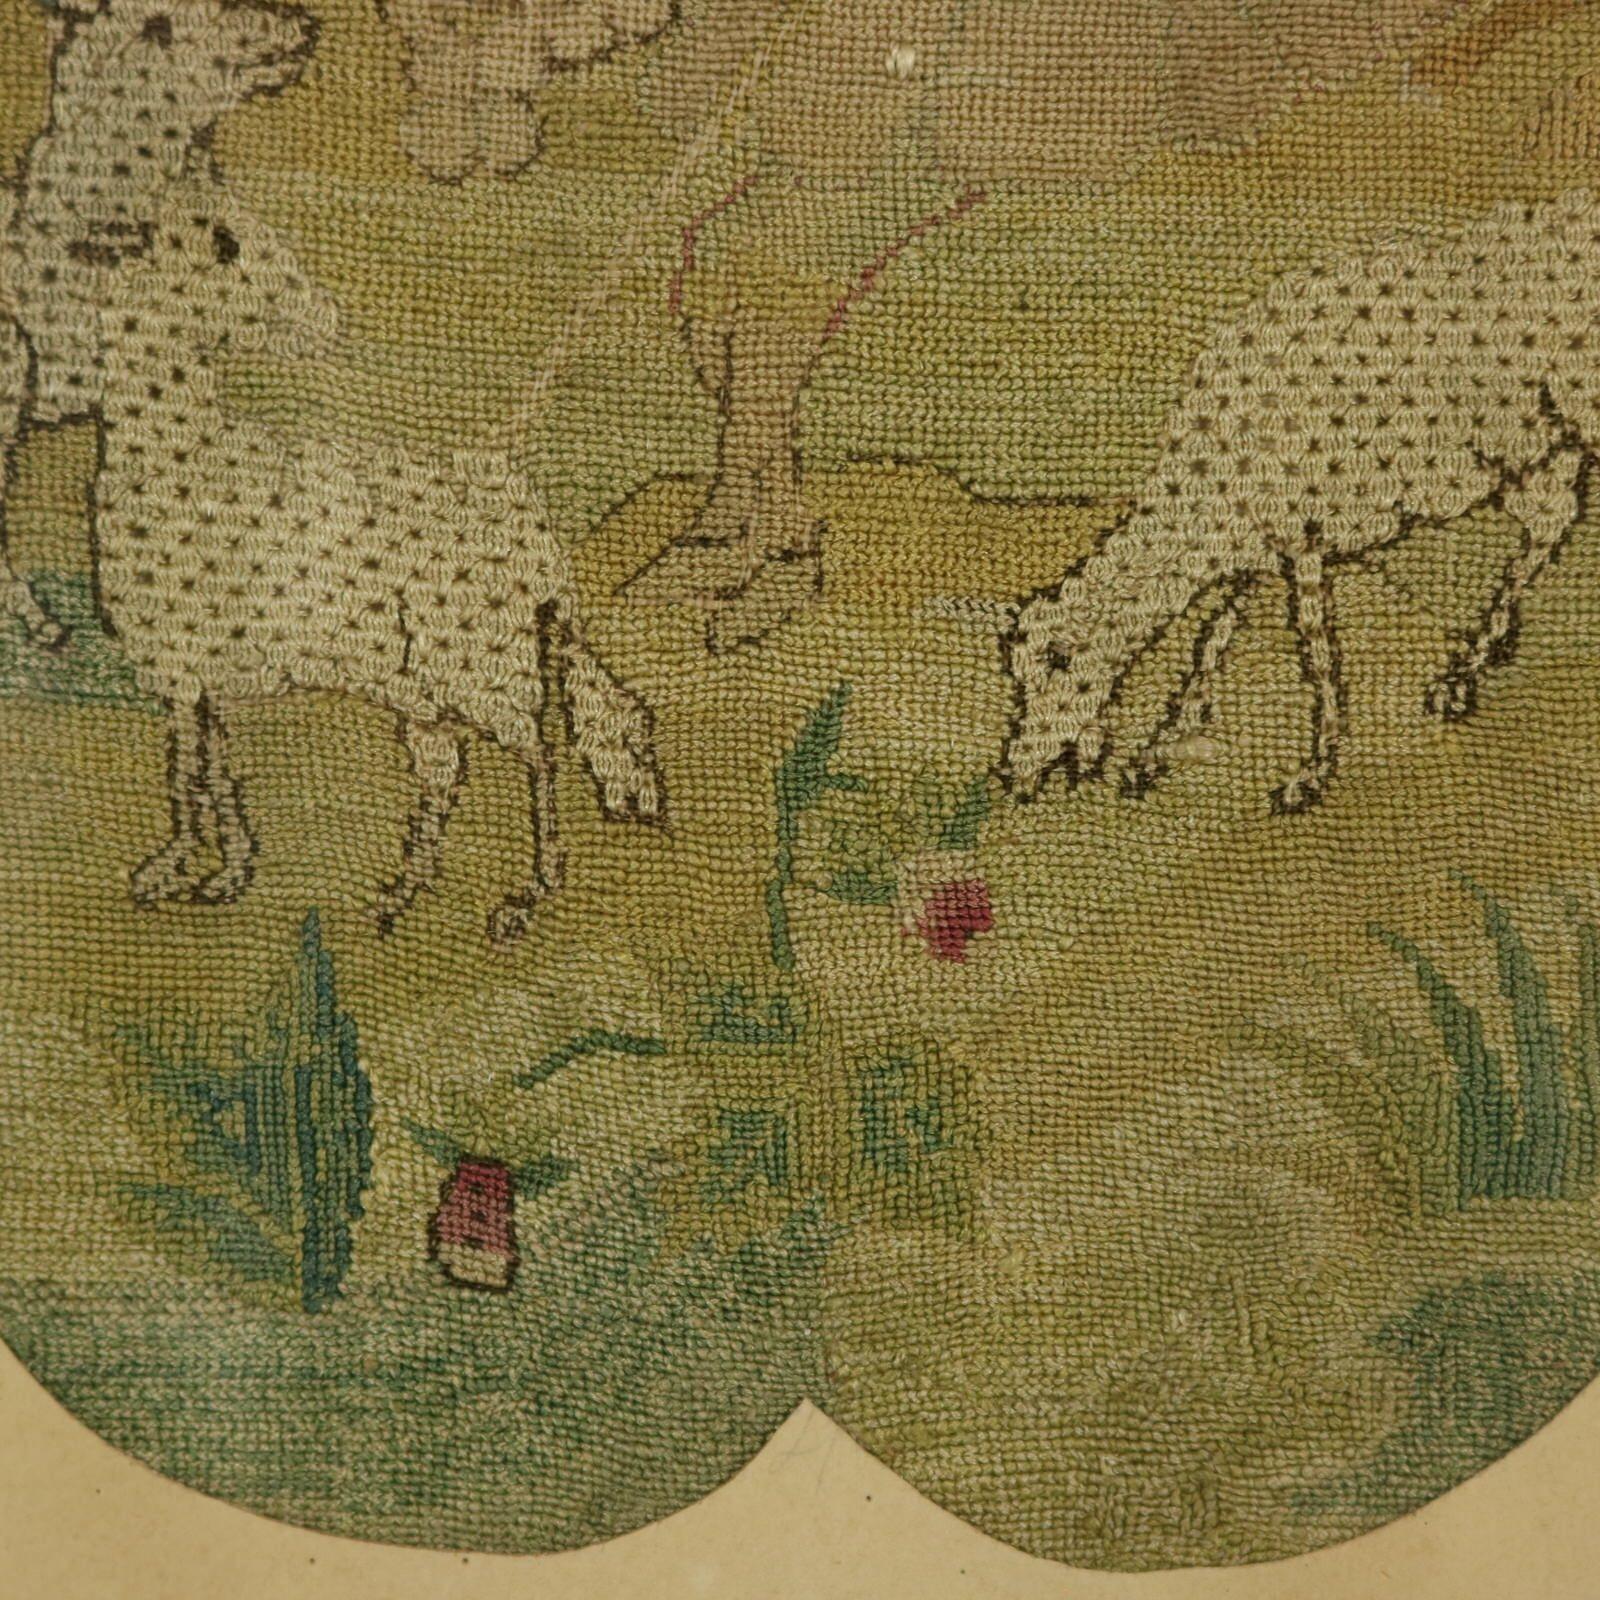 Silk 18th Century Tent Stitch Embroidered Picture of a Shepherd For Sale